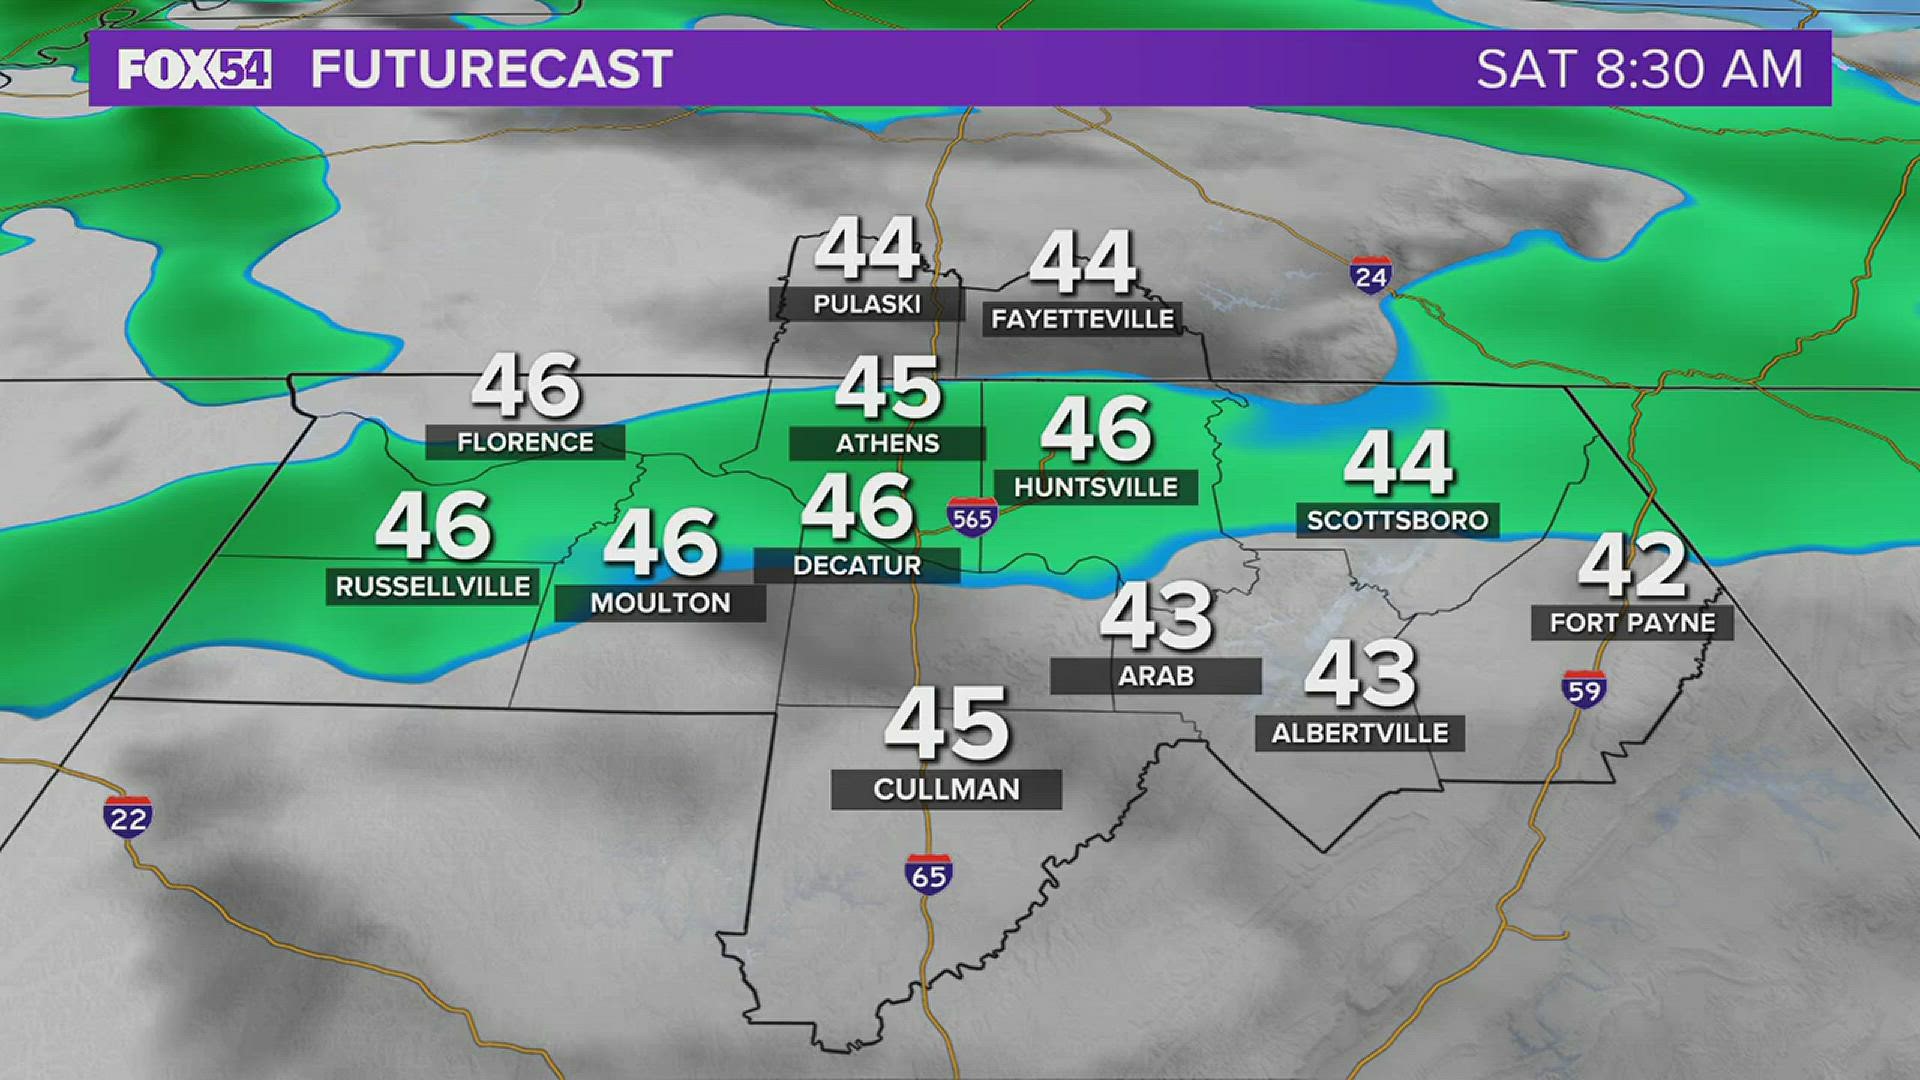 Weekend futurecast brings rain and snow to the Tennessee Valley